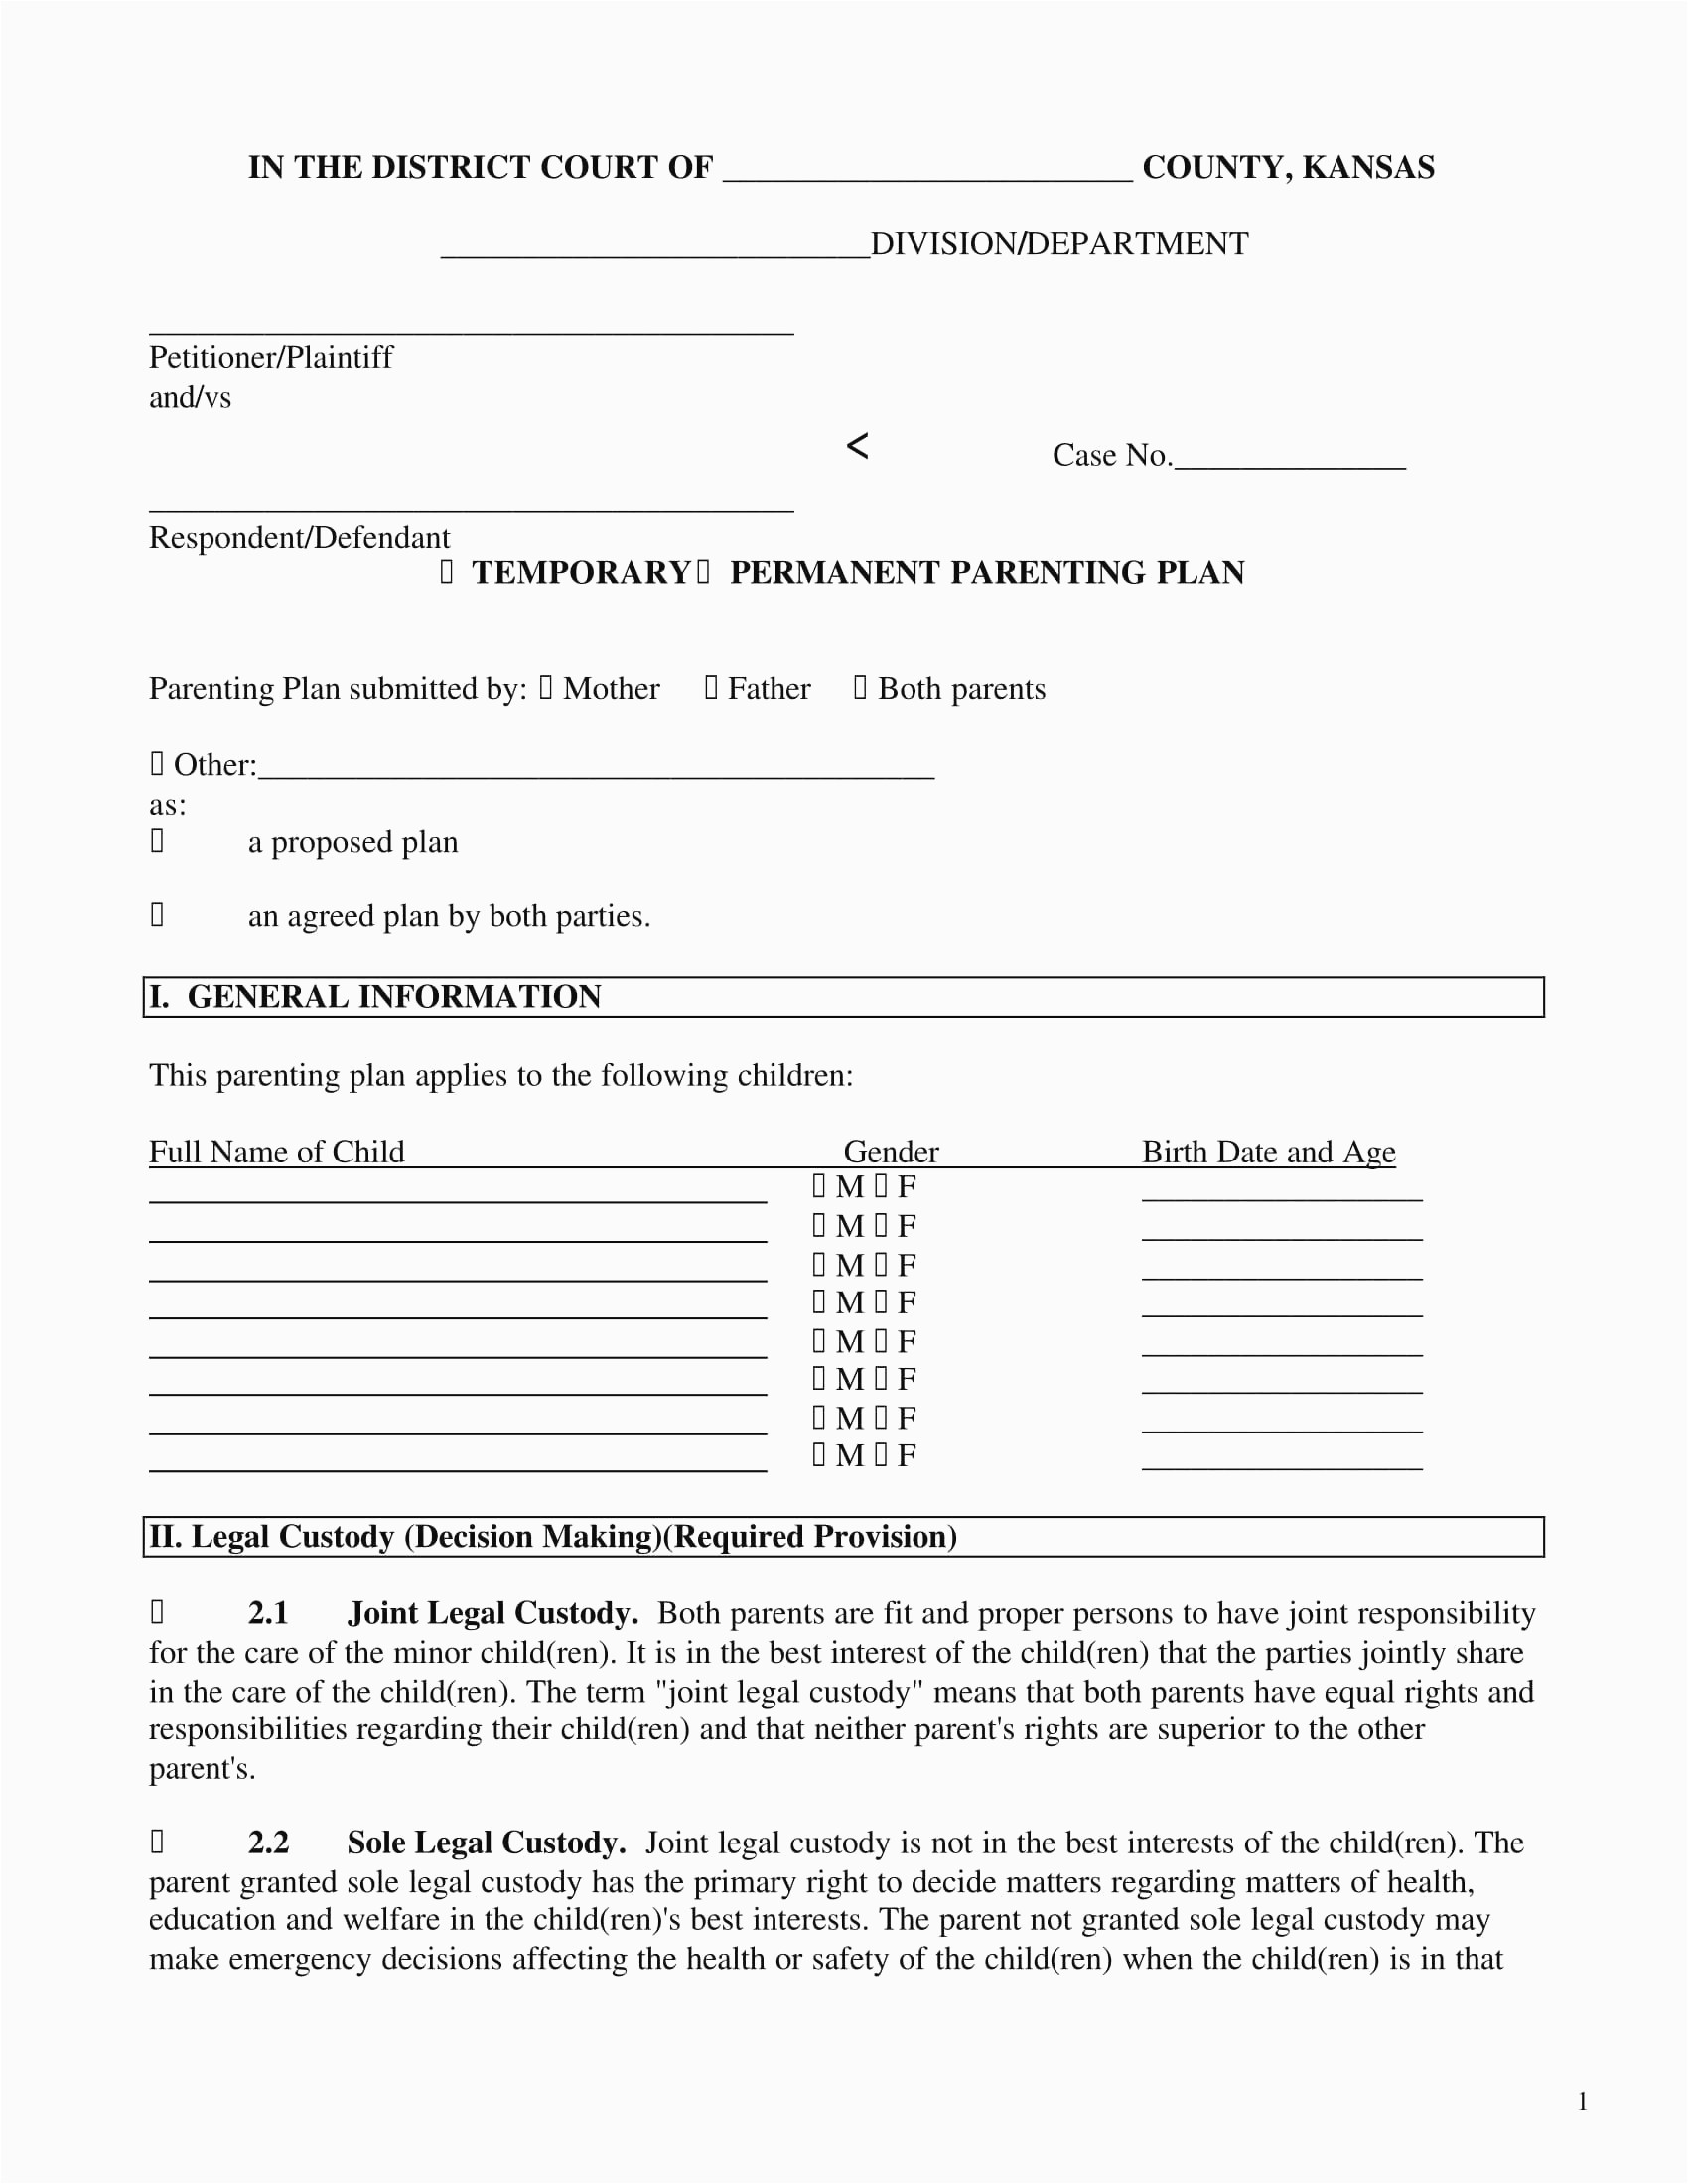 Sample Custody Agreement Forms 8+ Free Documents in Word, PDF